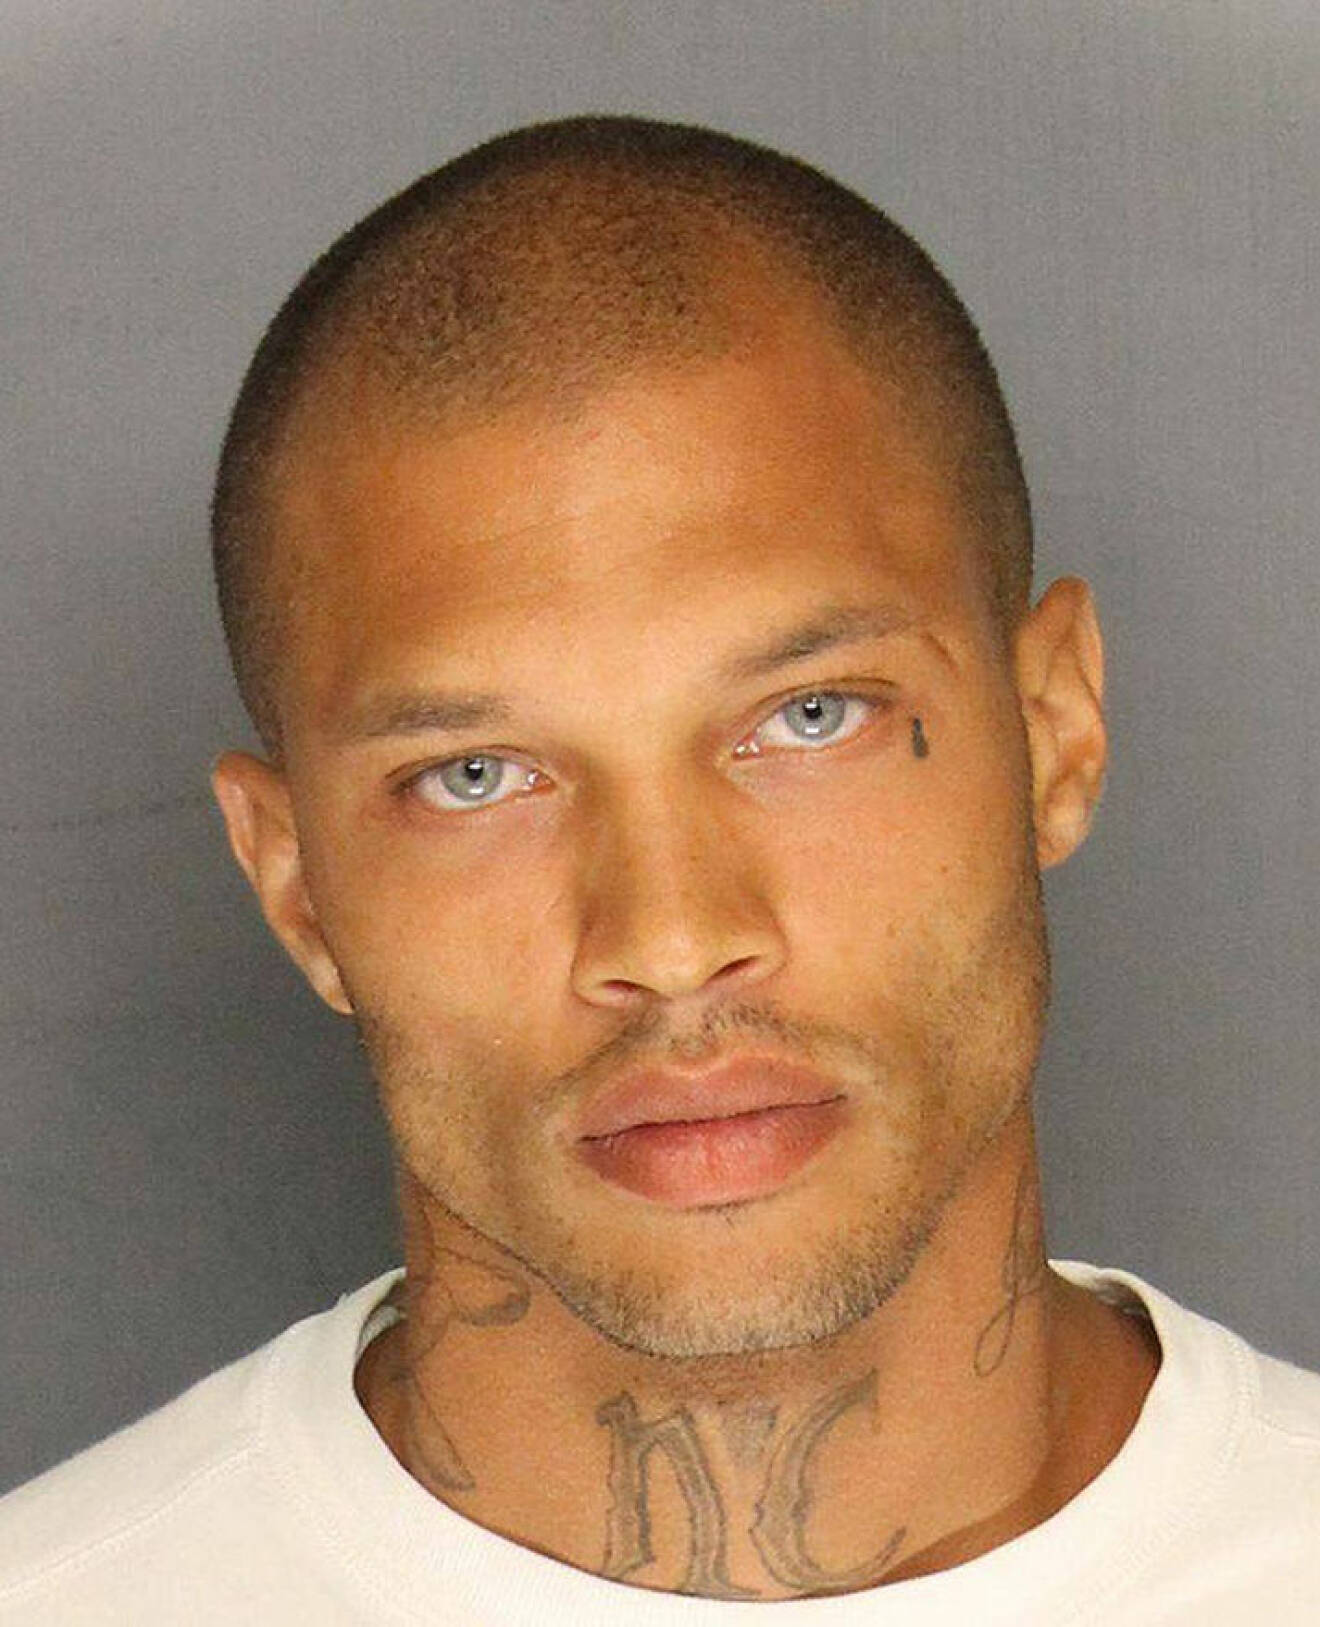 Mugshot of Jeremy Meeks, a 30 year old man, convicted felon, arrested for felony weapon charges A police mugshot of a suspect has attracted attention thanks to the man's chiselled good looks. Jeremy Meeks, 30, was arrested by California's Stockton Police Department in response to "a recent increase of shootings and robberies in the Weston Ranch area". But since his picture appeared on the department's Facebook page on Thursday (19 June) it has attracted 43,000 Likes and a gushing flow of comments on his handsome features. Comments on Meeks, described as a "convicted felon, arrested for felony weapon charges", include "You should use your handsome physique for good", "I want 5 kids from you", "Wow he's gorgeous I'll bail him out in one condition he needs to come home and marry me!!" and "here is the new face of versace 2014? Get this bruv an agent & off the streets!" However Julia Augspurger wrote: "He's a criminal whats wrong with you People"